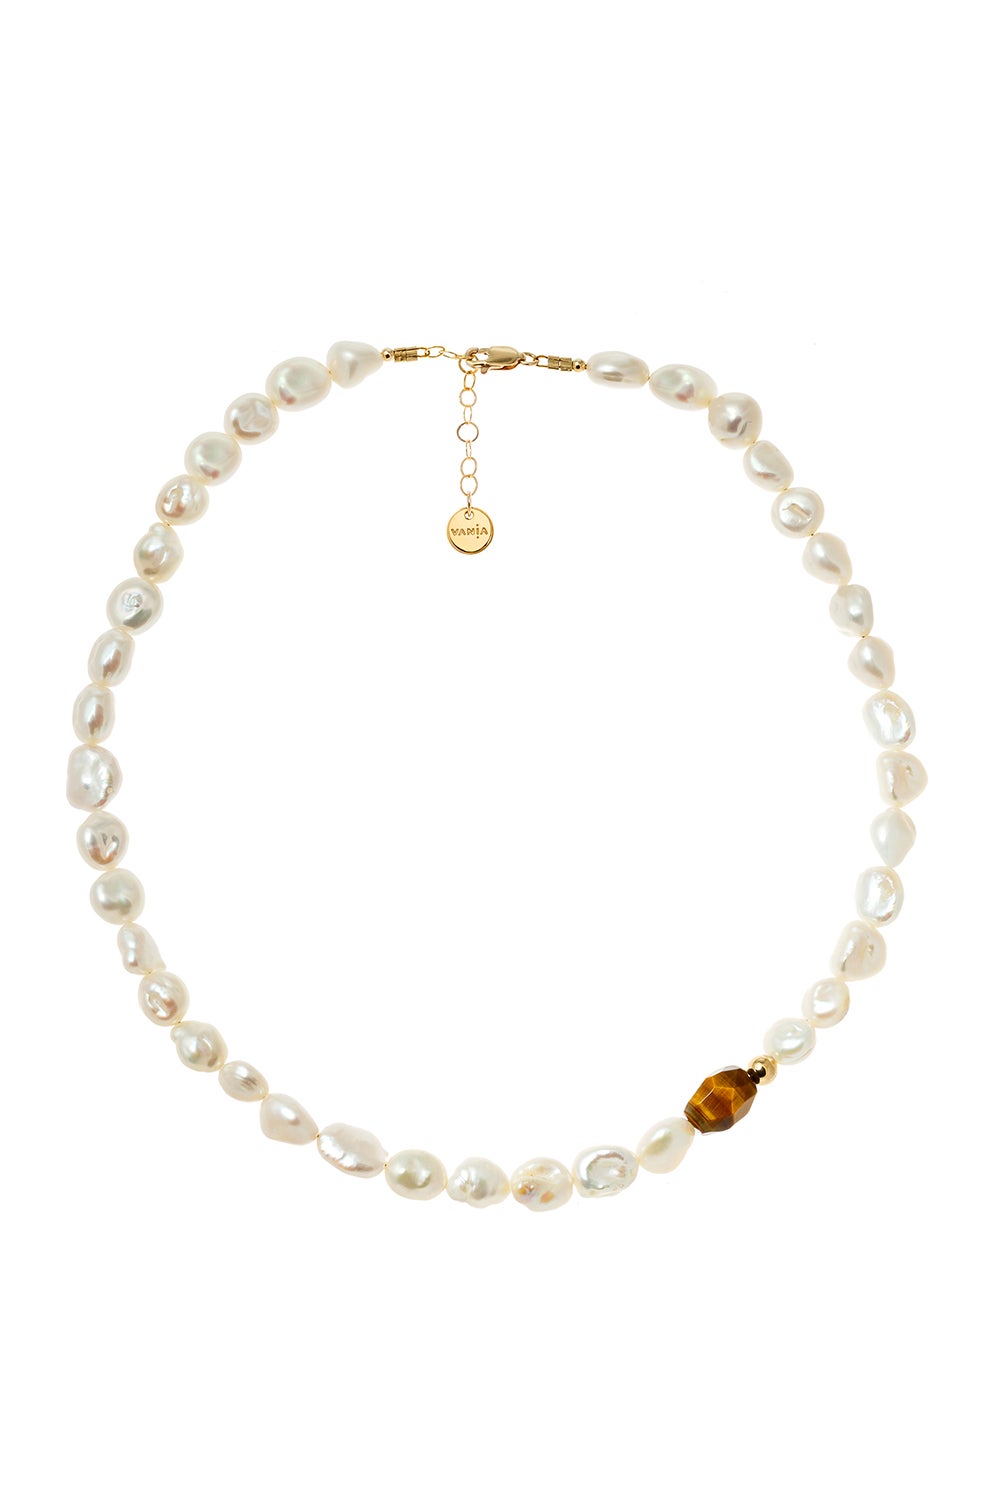 Vania Large Pearl with Tiger's Eye Necklace